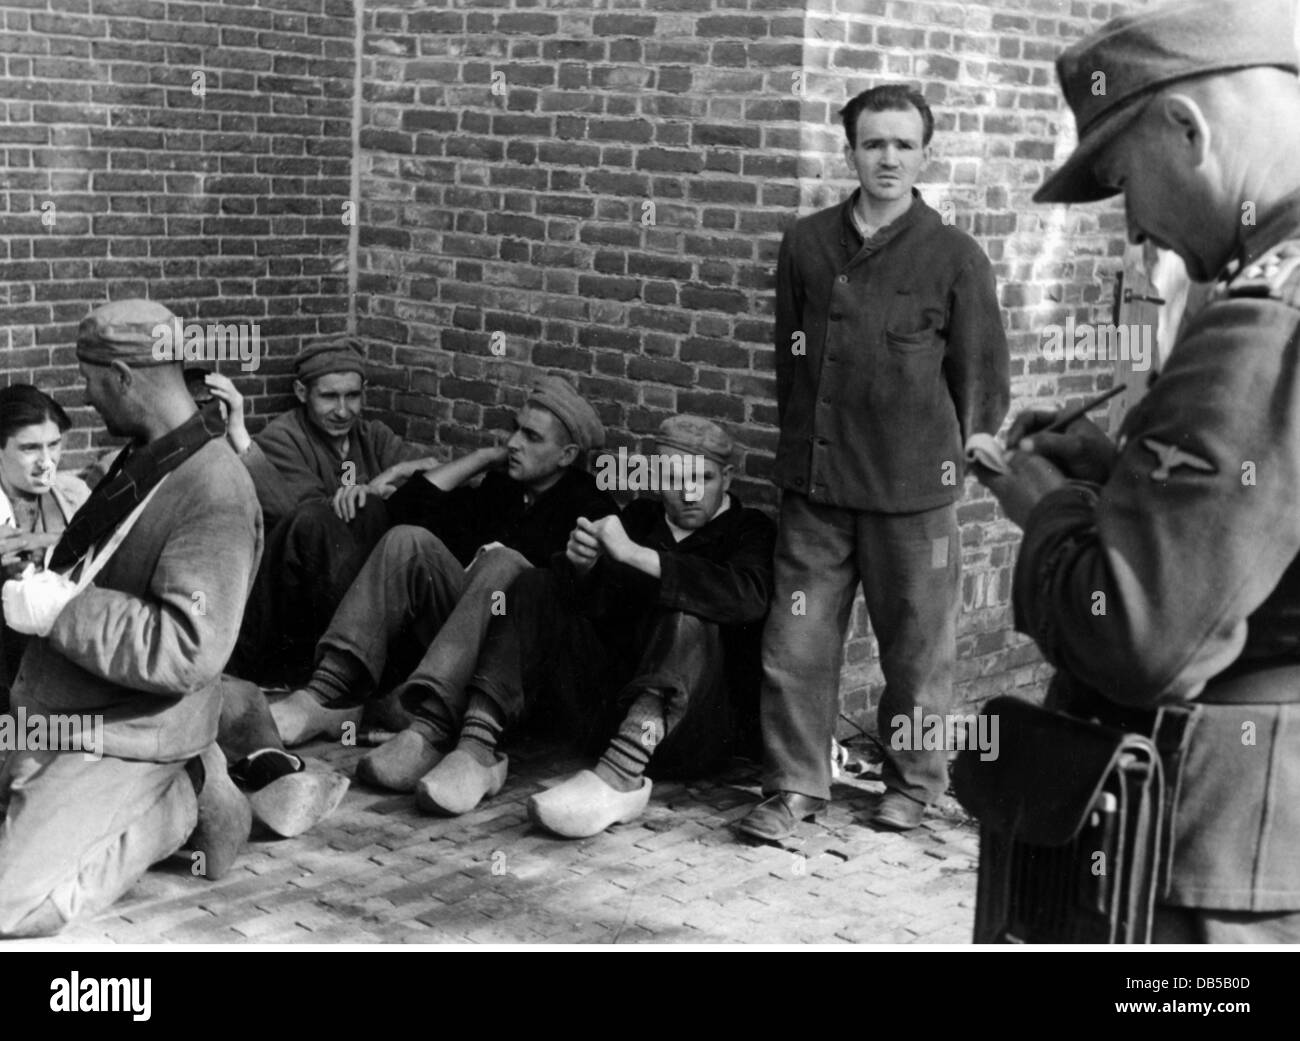 events, Second World War / WWII, Netherlands, Arnhem, 17. - 25.9.1944, inmates of a prison, released by the local Dutch authorities on 18.9.1944, recaptured by the Germans on 21.9.1944, Additional-Rights-Clearences-Not Available Stock Photo